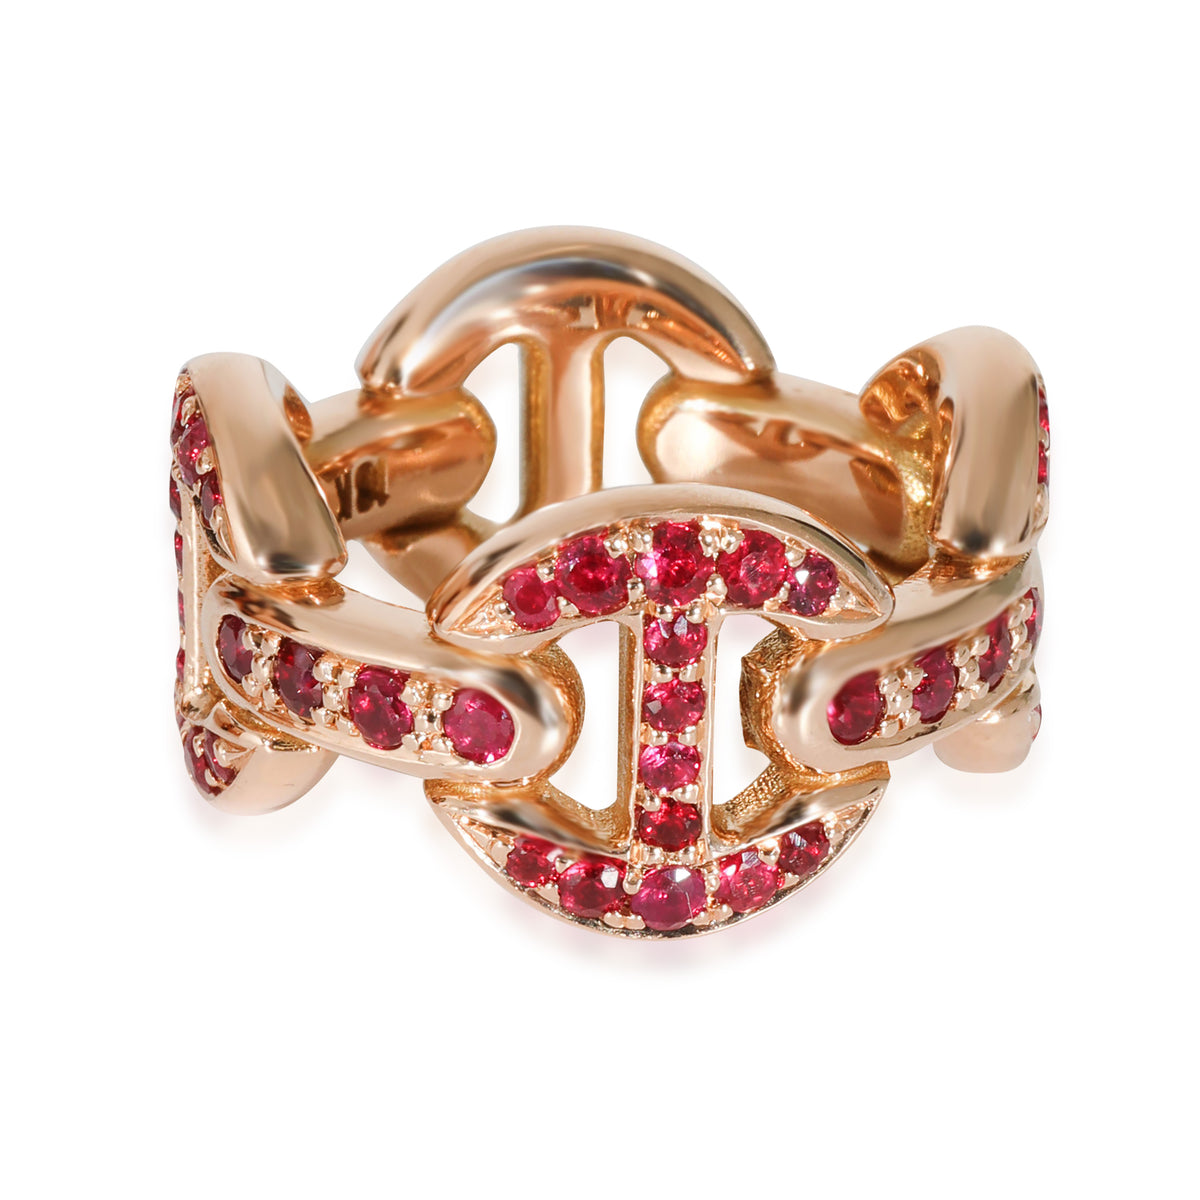 Hoorsenbuhs Antiquated Tri-Link Ring with Rubies in 18k Rose Gold